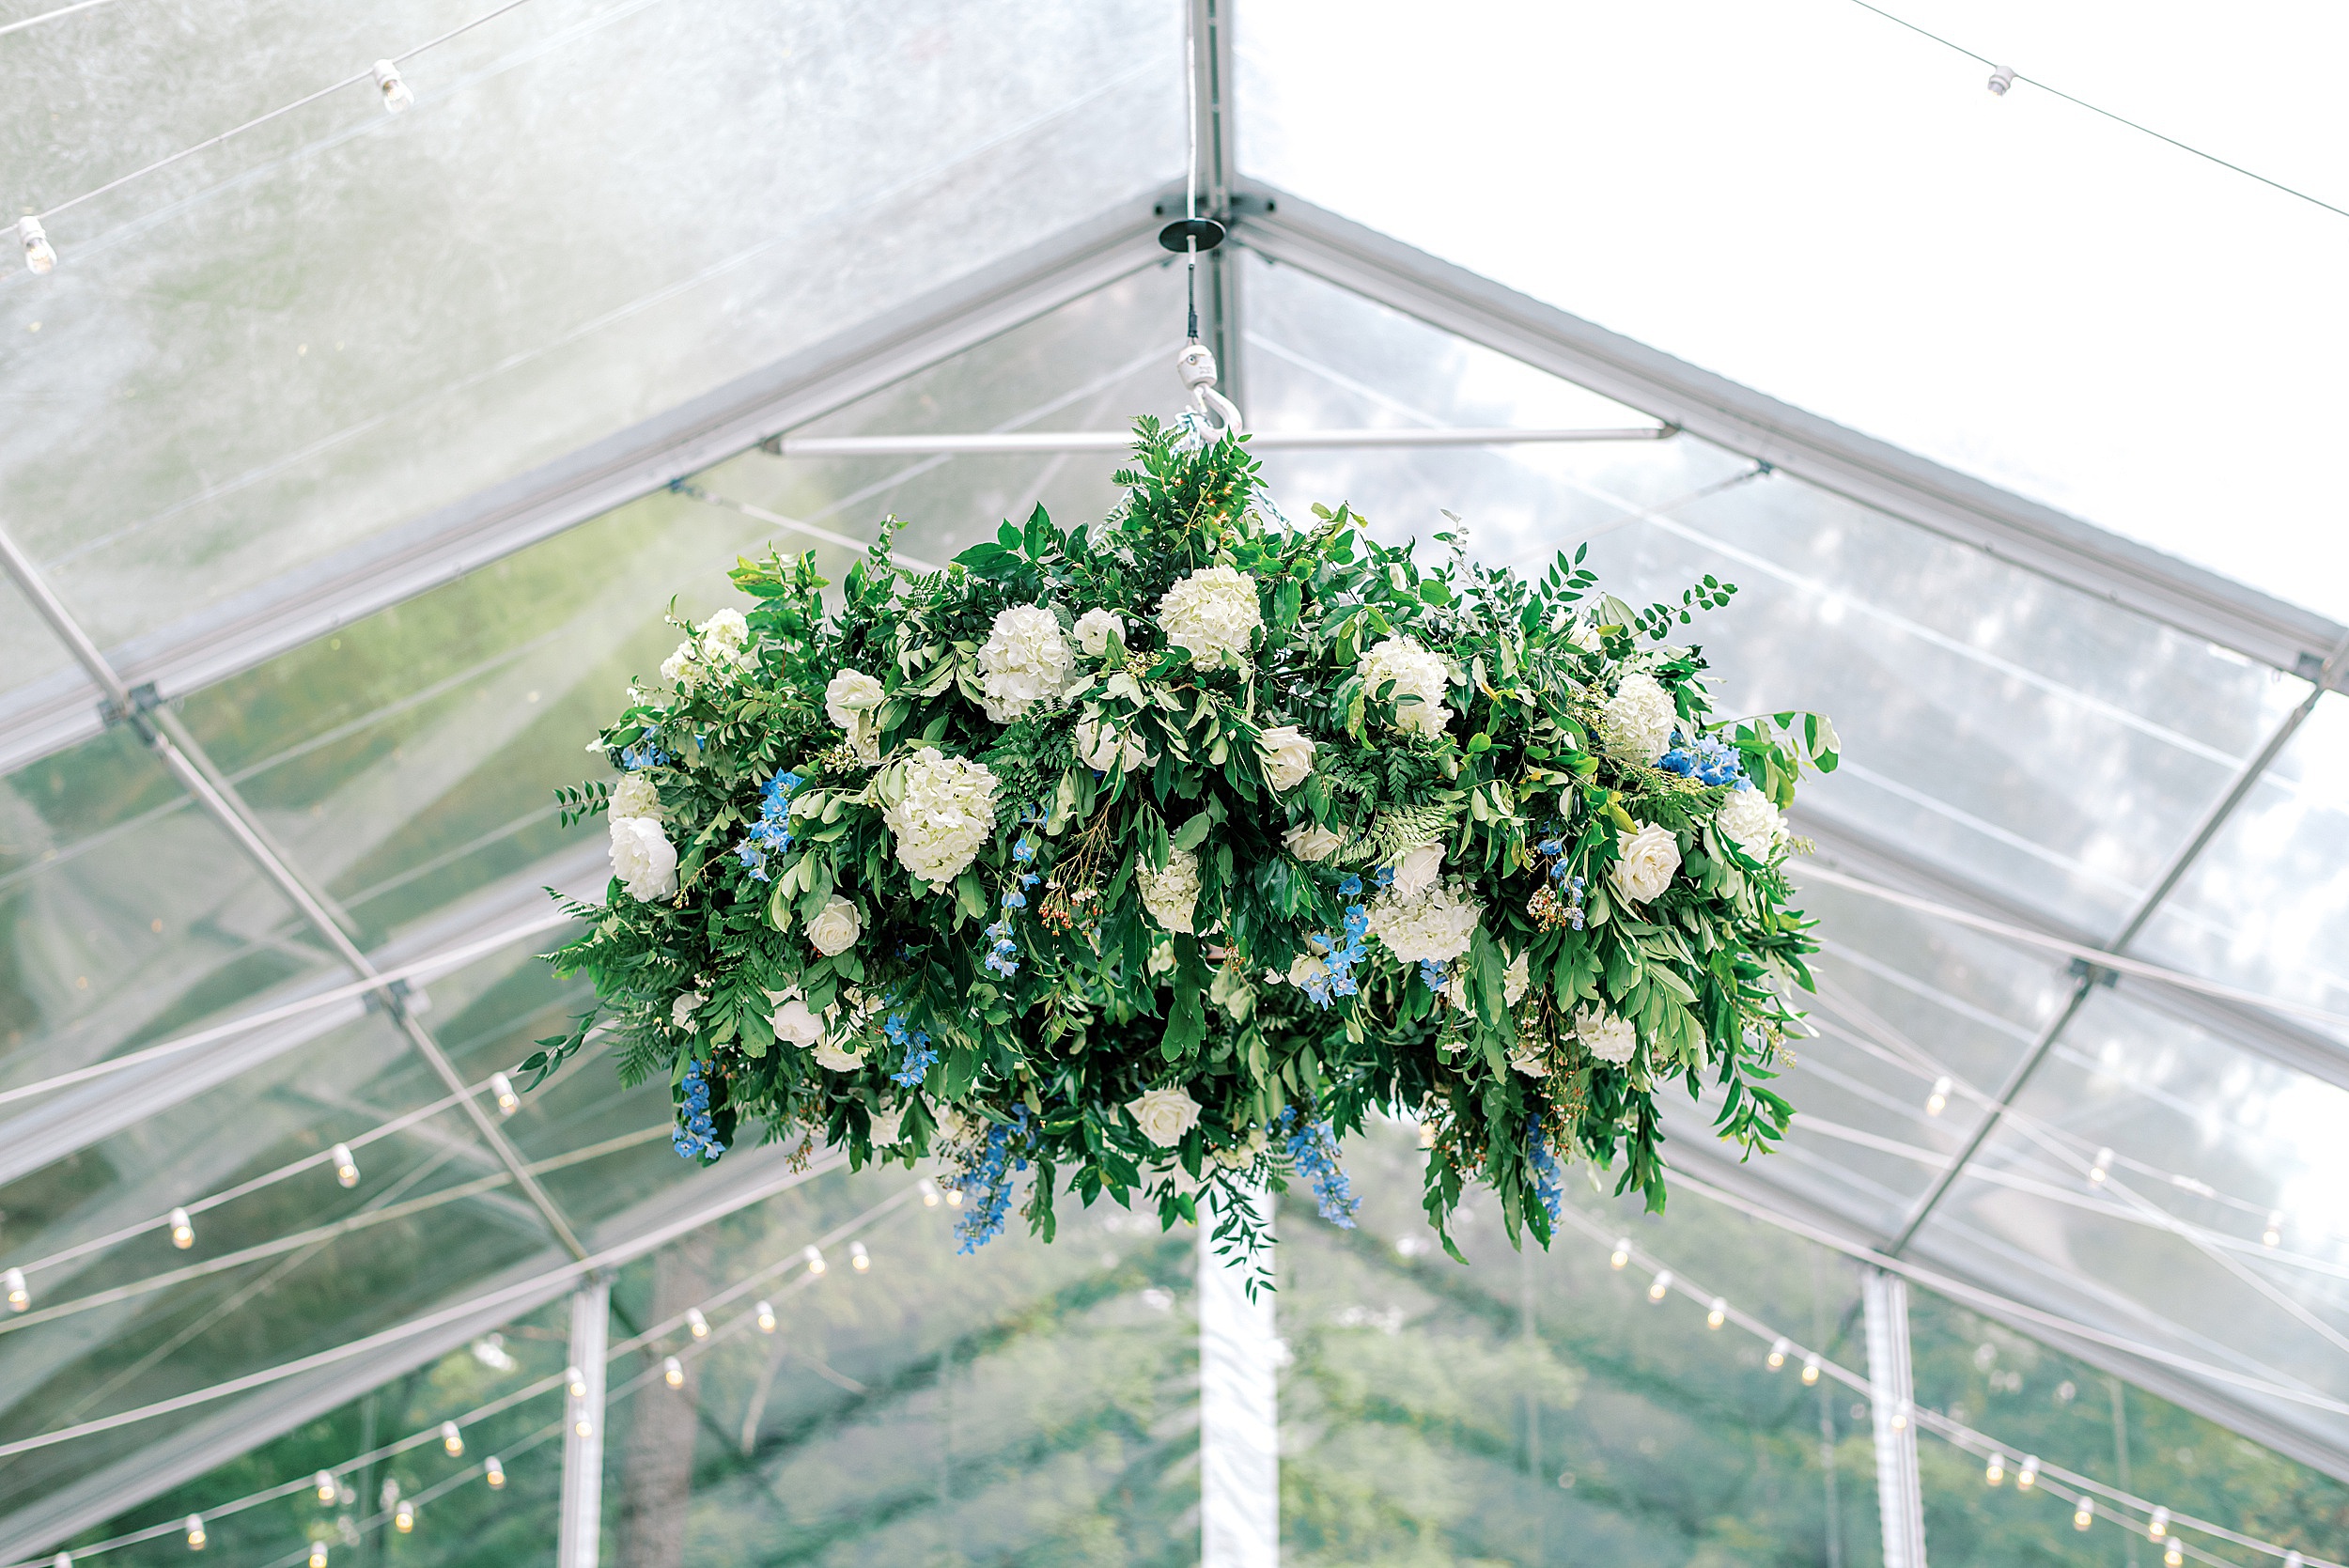 Details of a hanging wedding floral arrangement with white and blue flowers at one of the